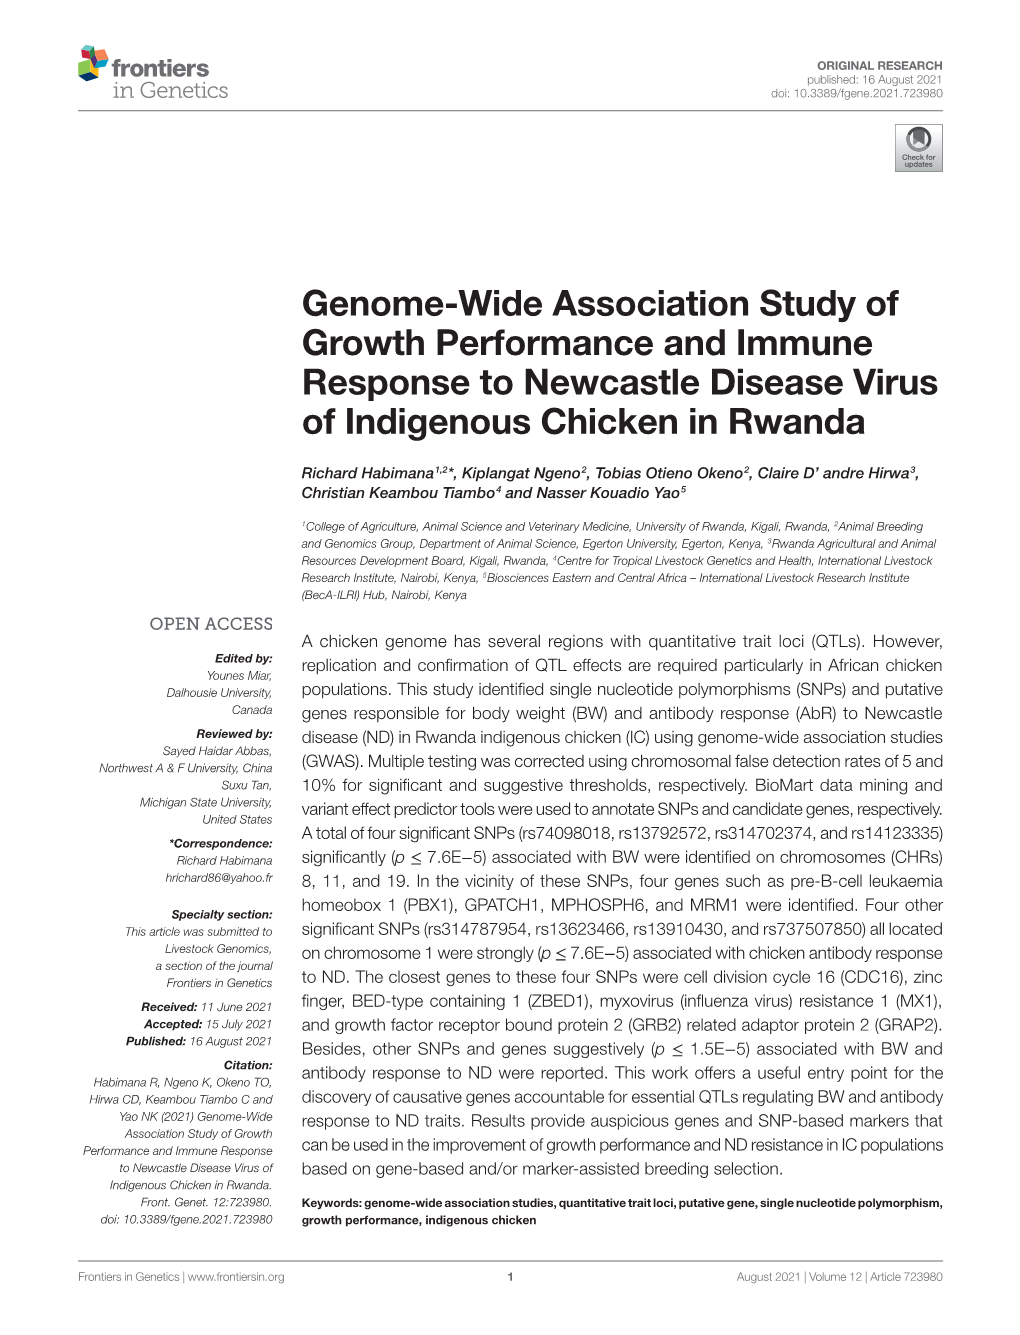 Genome-Wide Association Study of Growth Performance and Immune Response to Newcastle Disease Virus of Indigenous Chicken in Rwanda